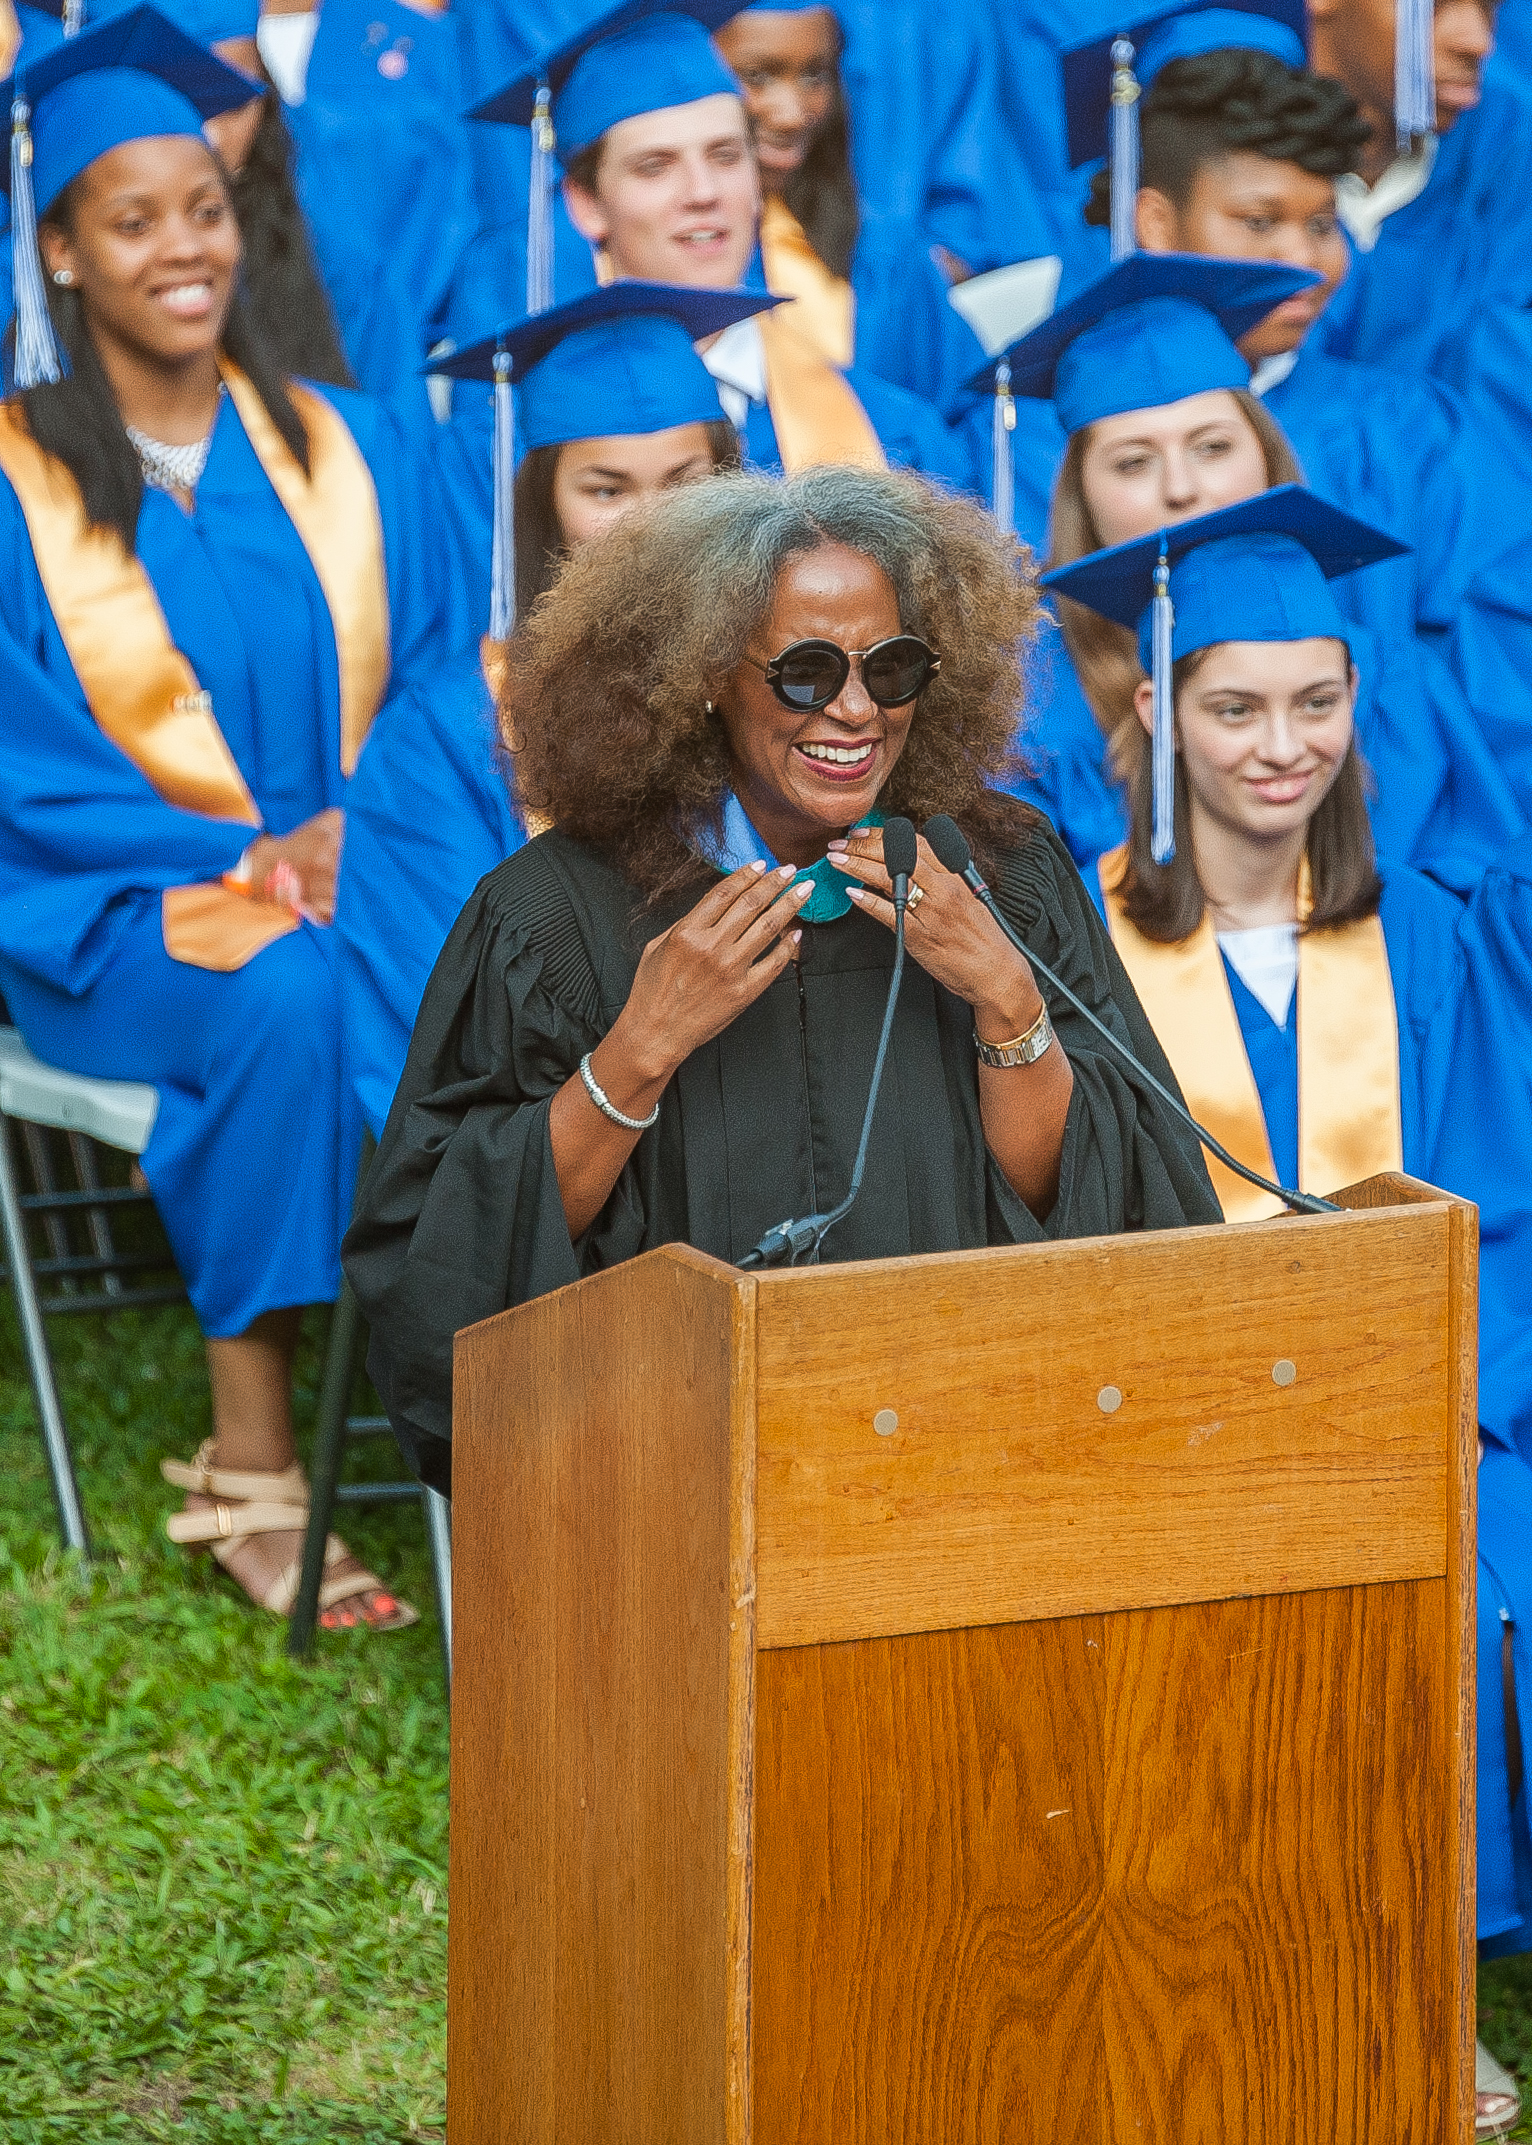 Benilde Little giving her commencement speech. Photo by Scott Kennedy for The Montclair Dispatch.